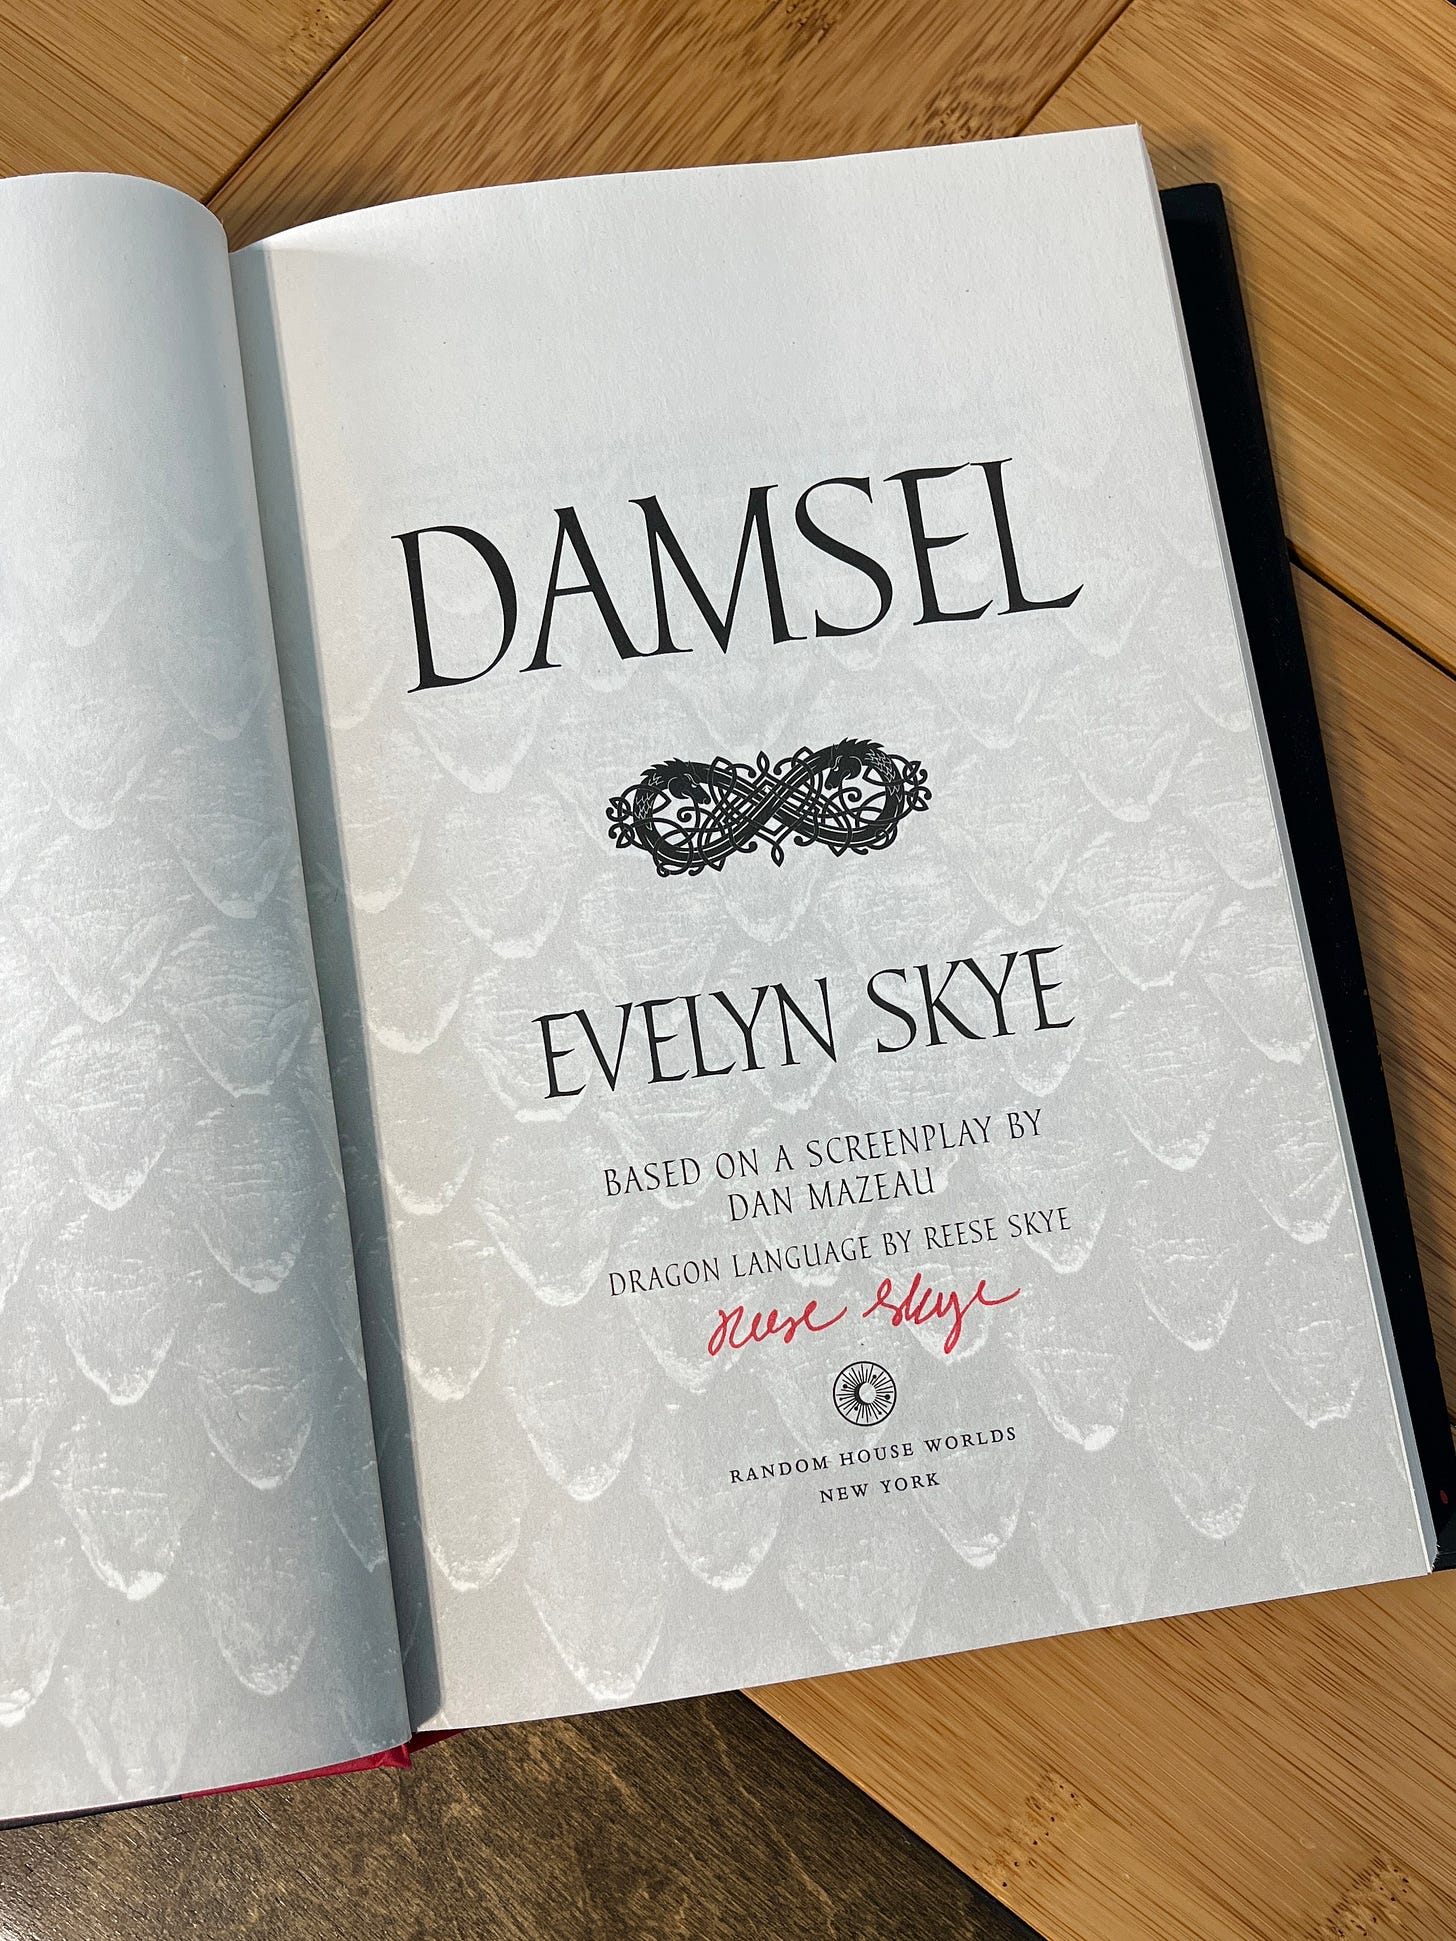 Author Evelyn Skye and daughter Reese’s name on the title page of DAMSEL